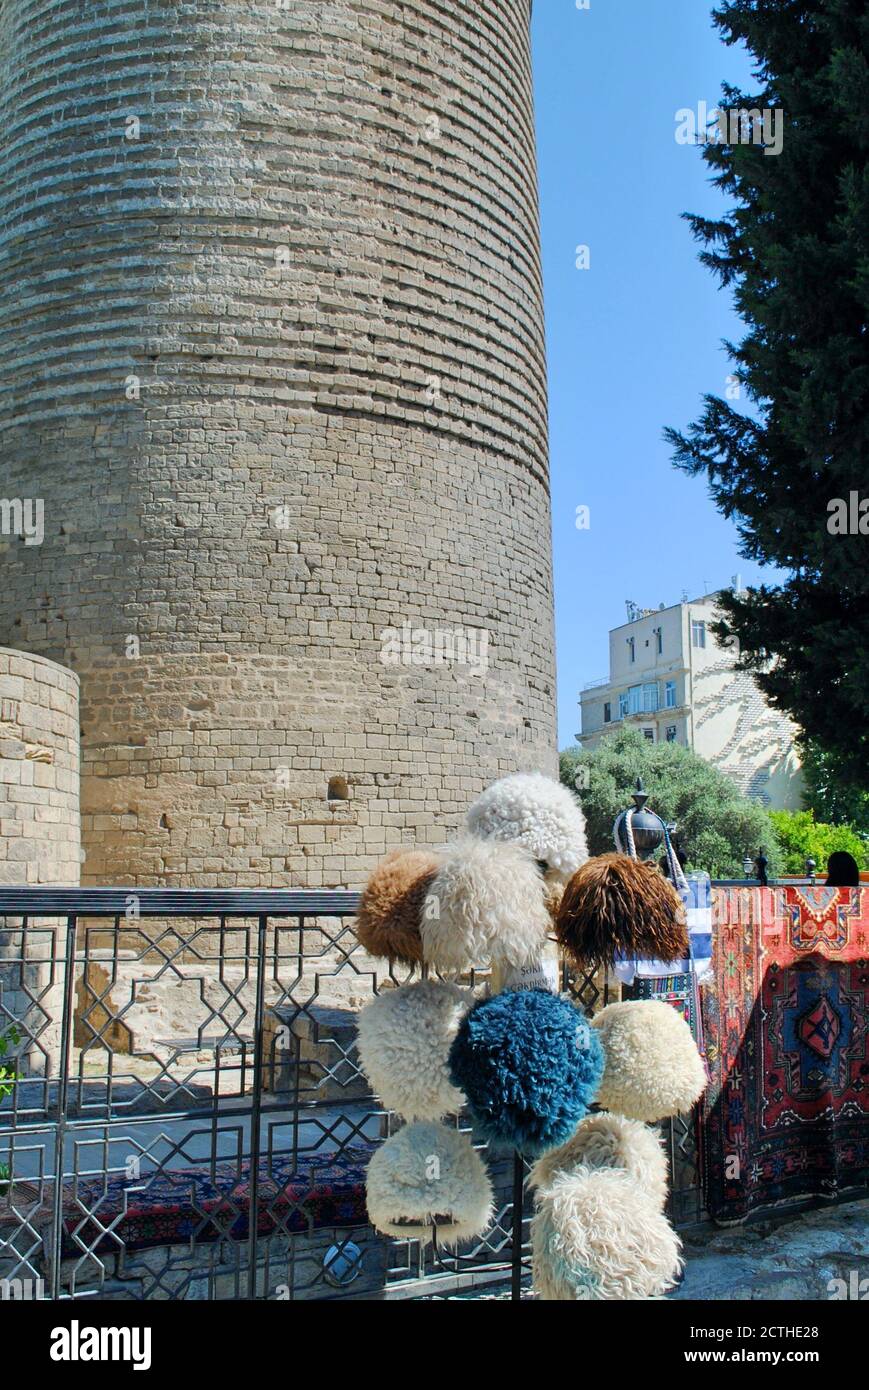 A display of traditional Azeri, Caucasian souvenir sheep wool Papakha hats  and rags in front of Maiden Tower. The Walled City in Baku, Azerbaijan  Stock Photo - Alamy